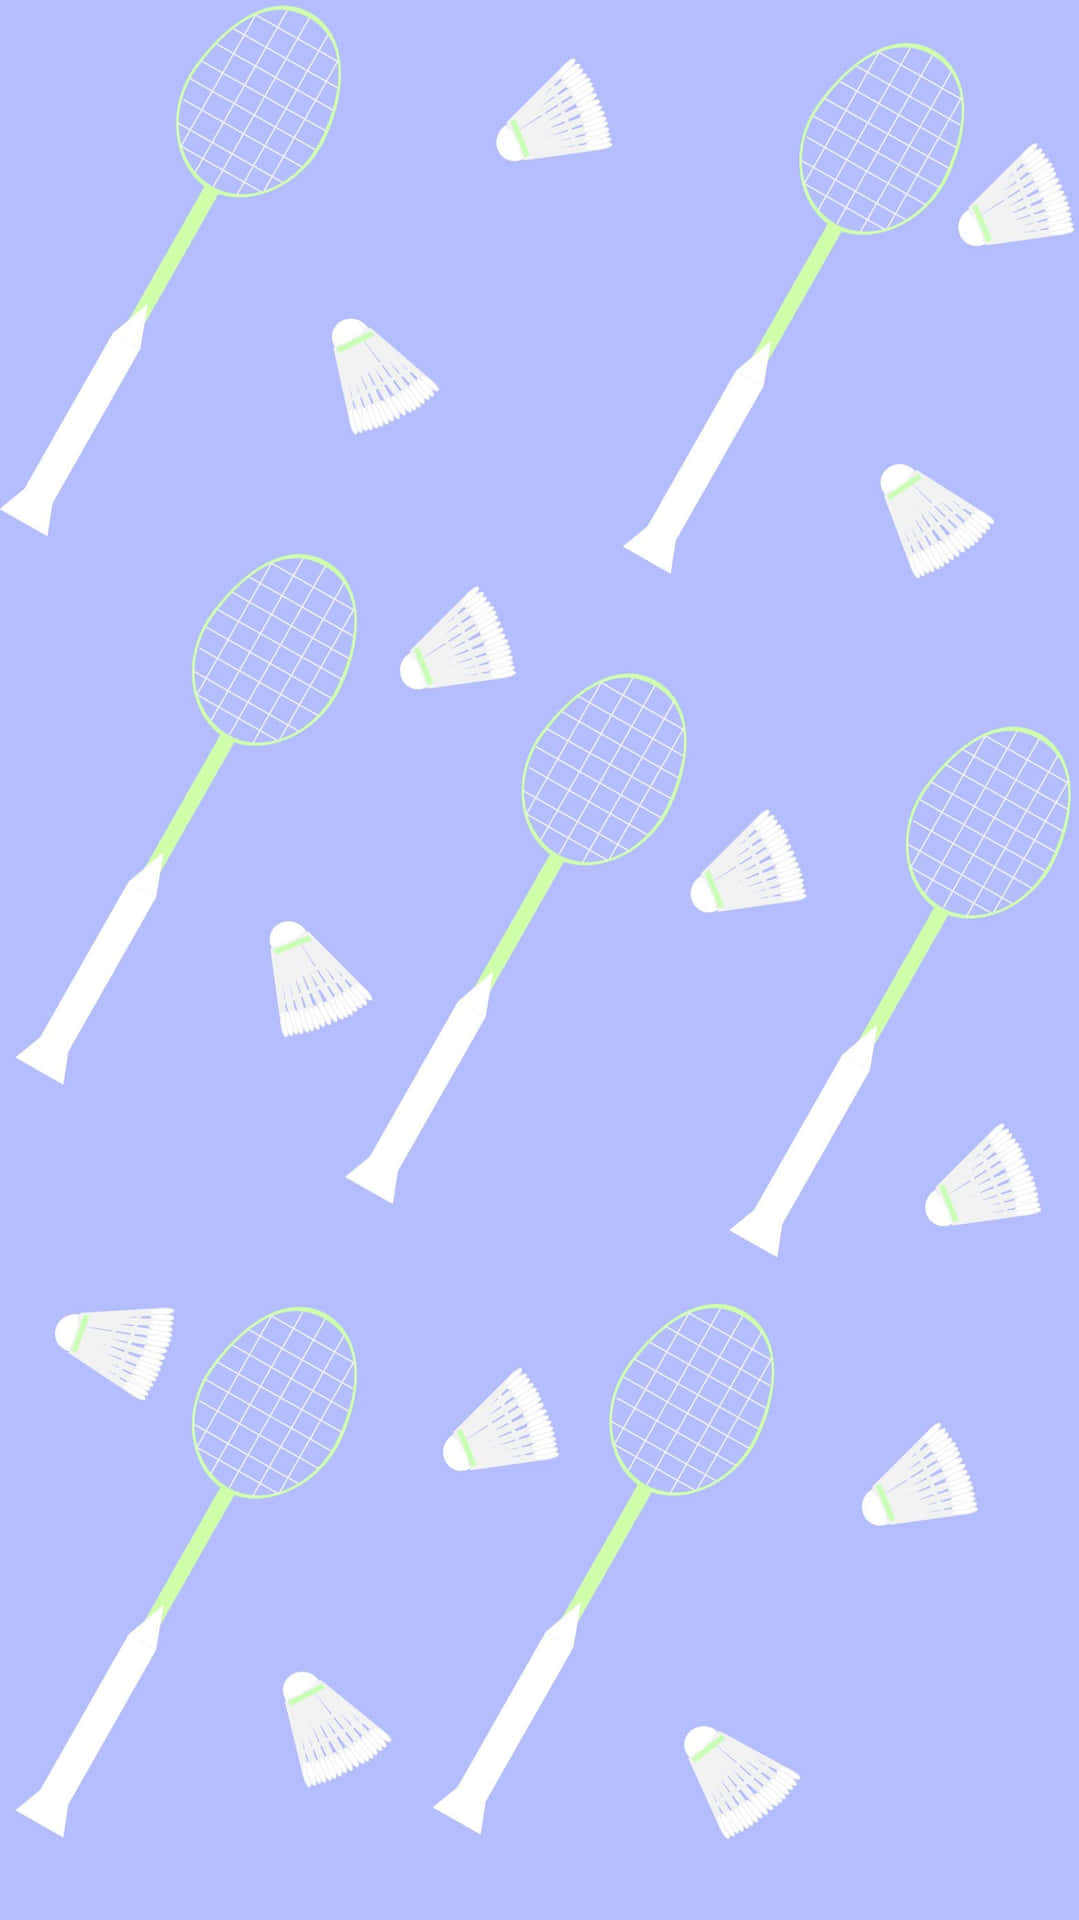 Get into Badminton with Android